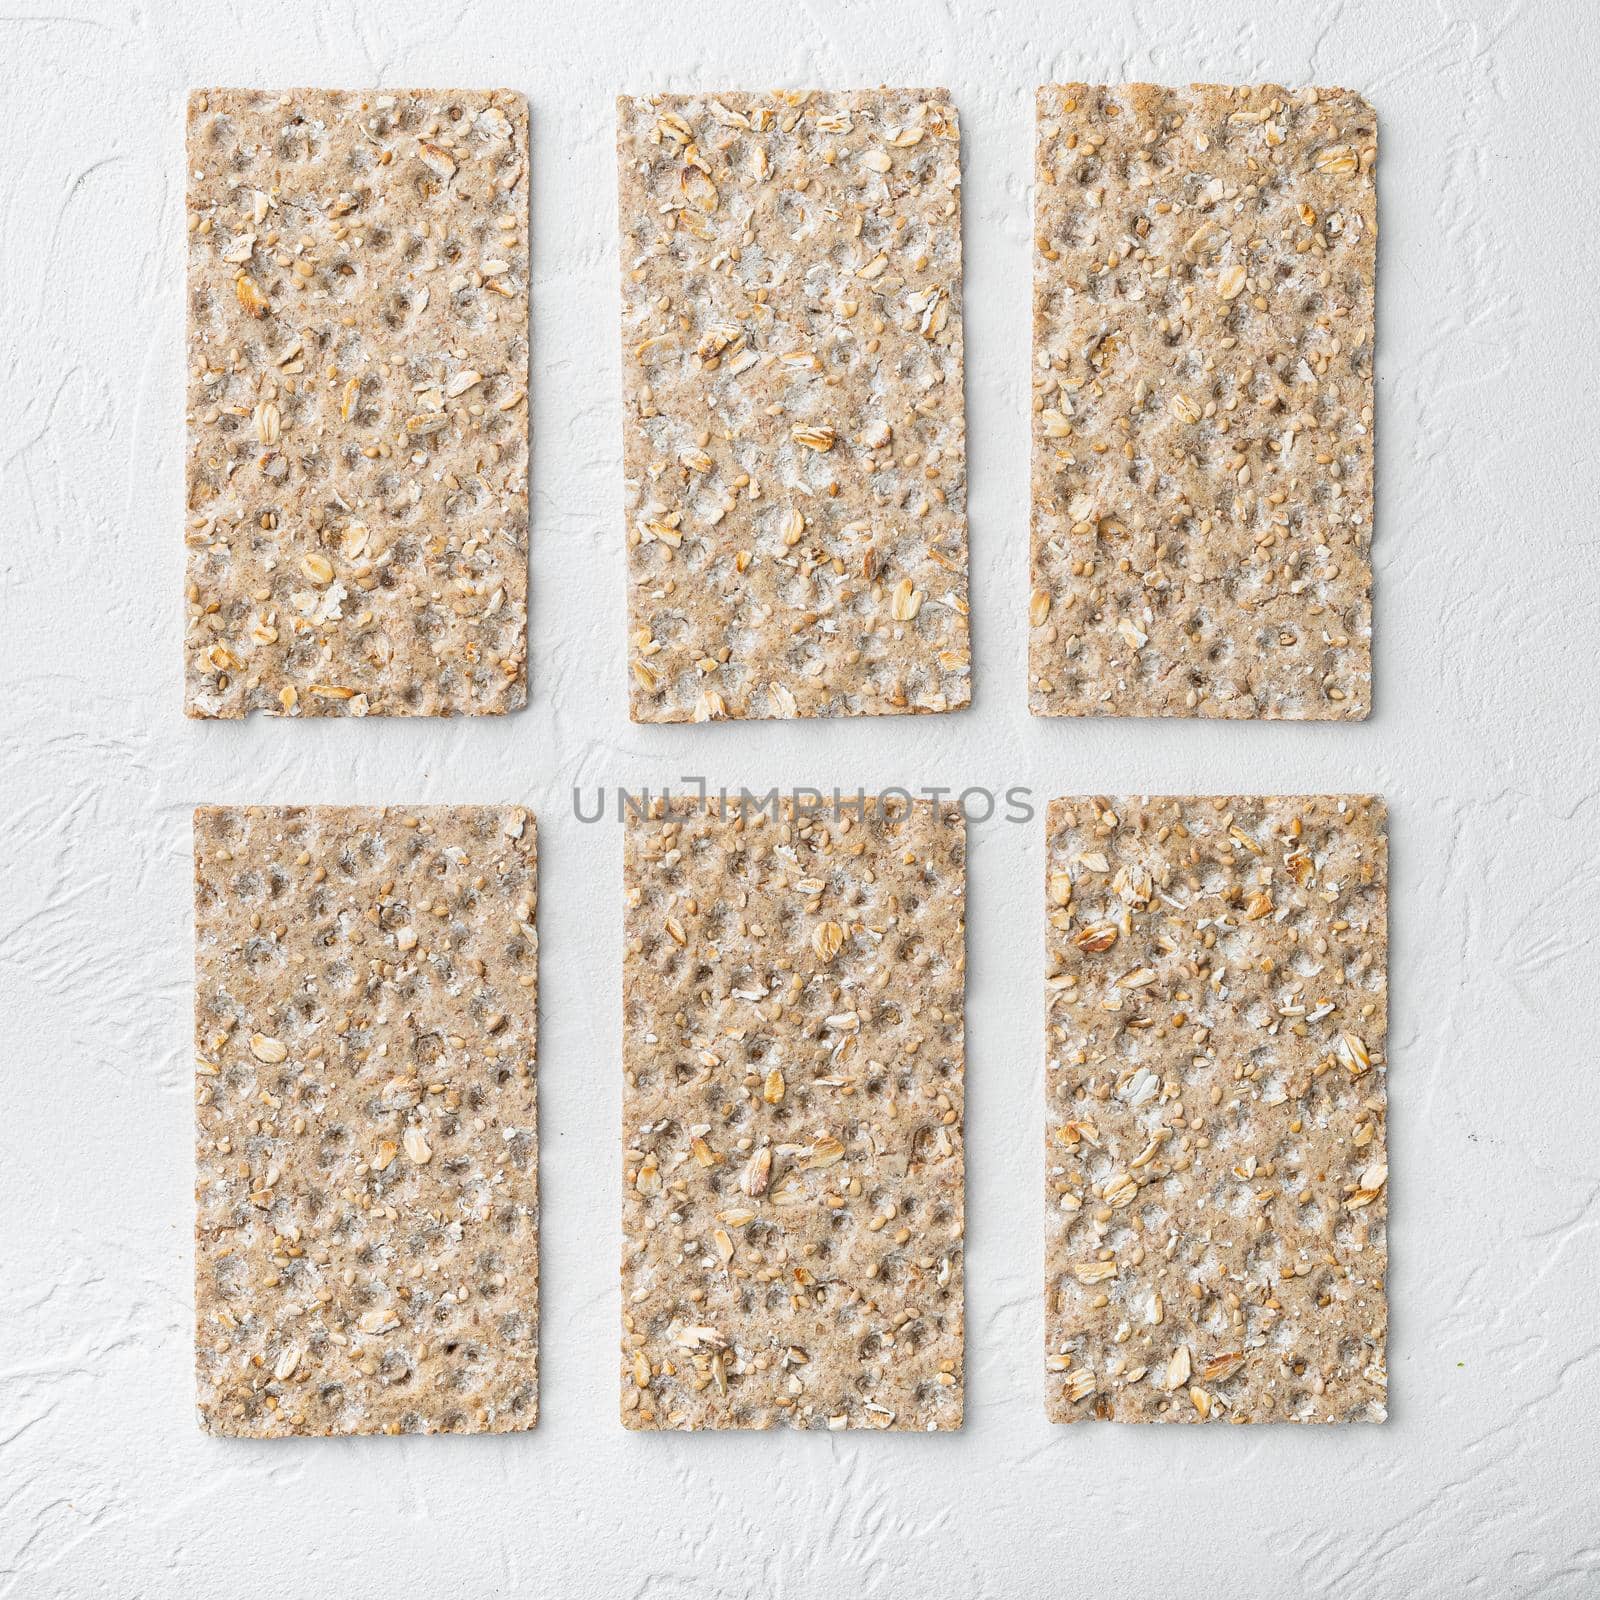 Grain diet light crisp bread, square format , on white stone table background, top view flat lay, with copy space for text by Ilianesolenyi